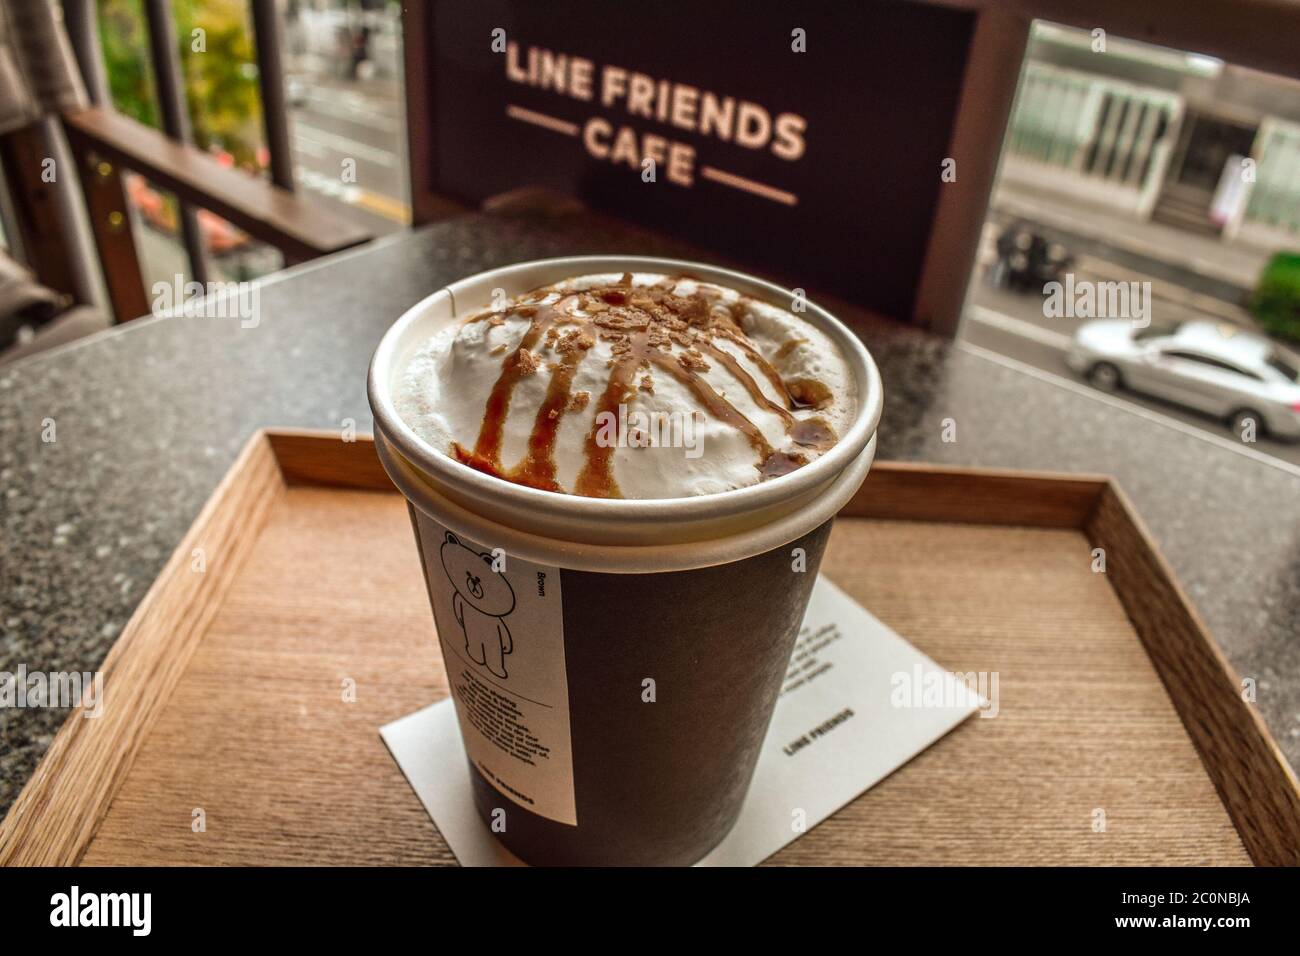 Chocolate top coffee served in Line Friends Cafe in Insadong Seoul South Korea Stock Photo